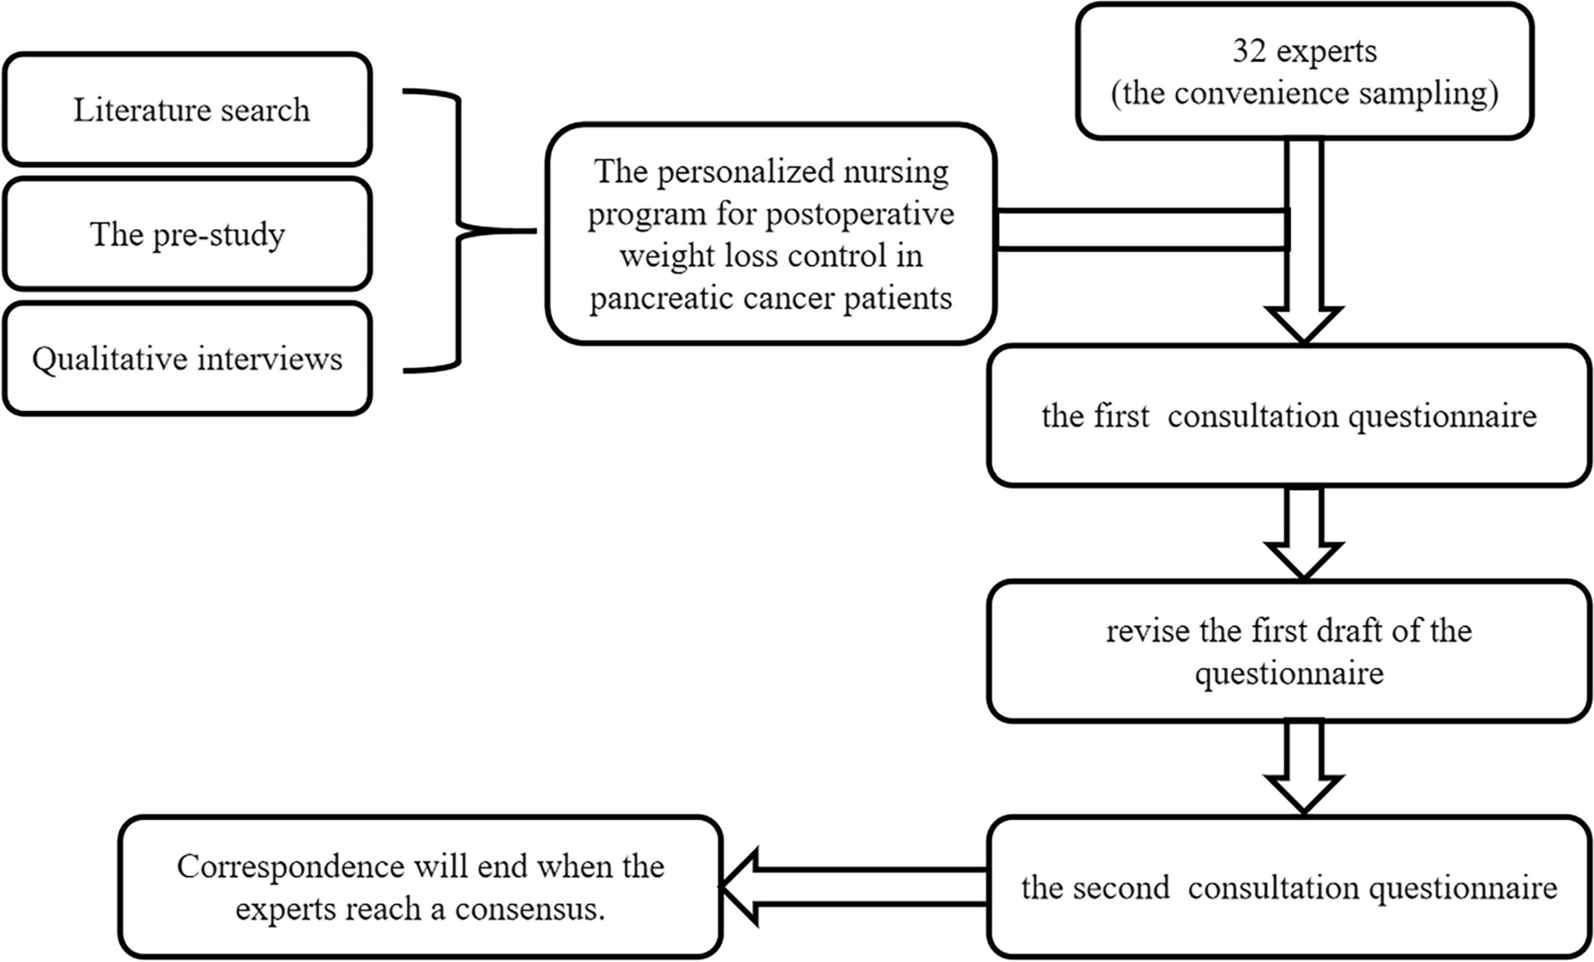 Construction of individualised care programmes for patients with pancreatic cancer with postoperative weight-loss control based on the Delphi method: a cross-sectional study in China